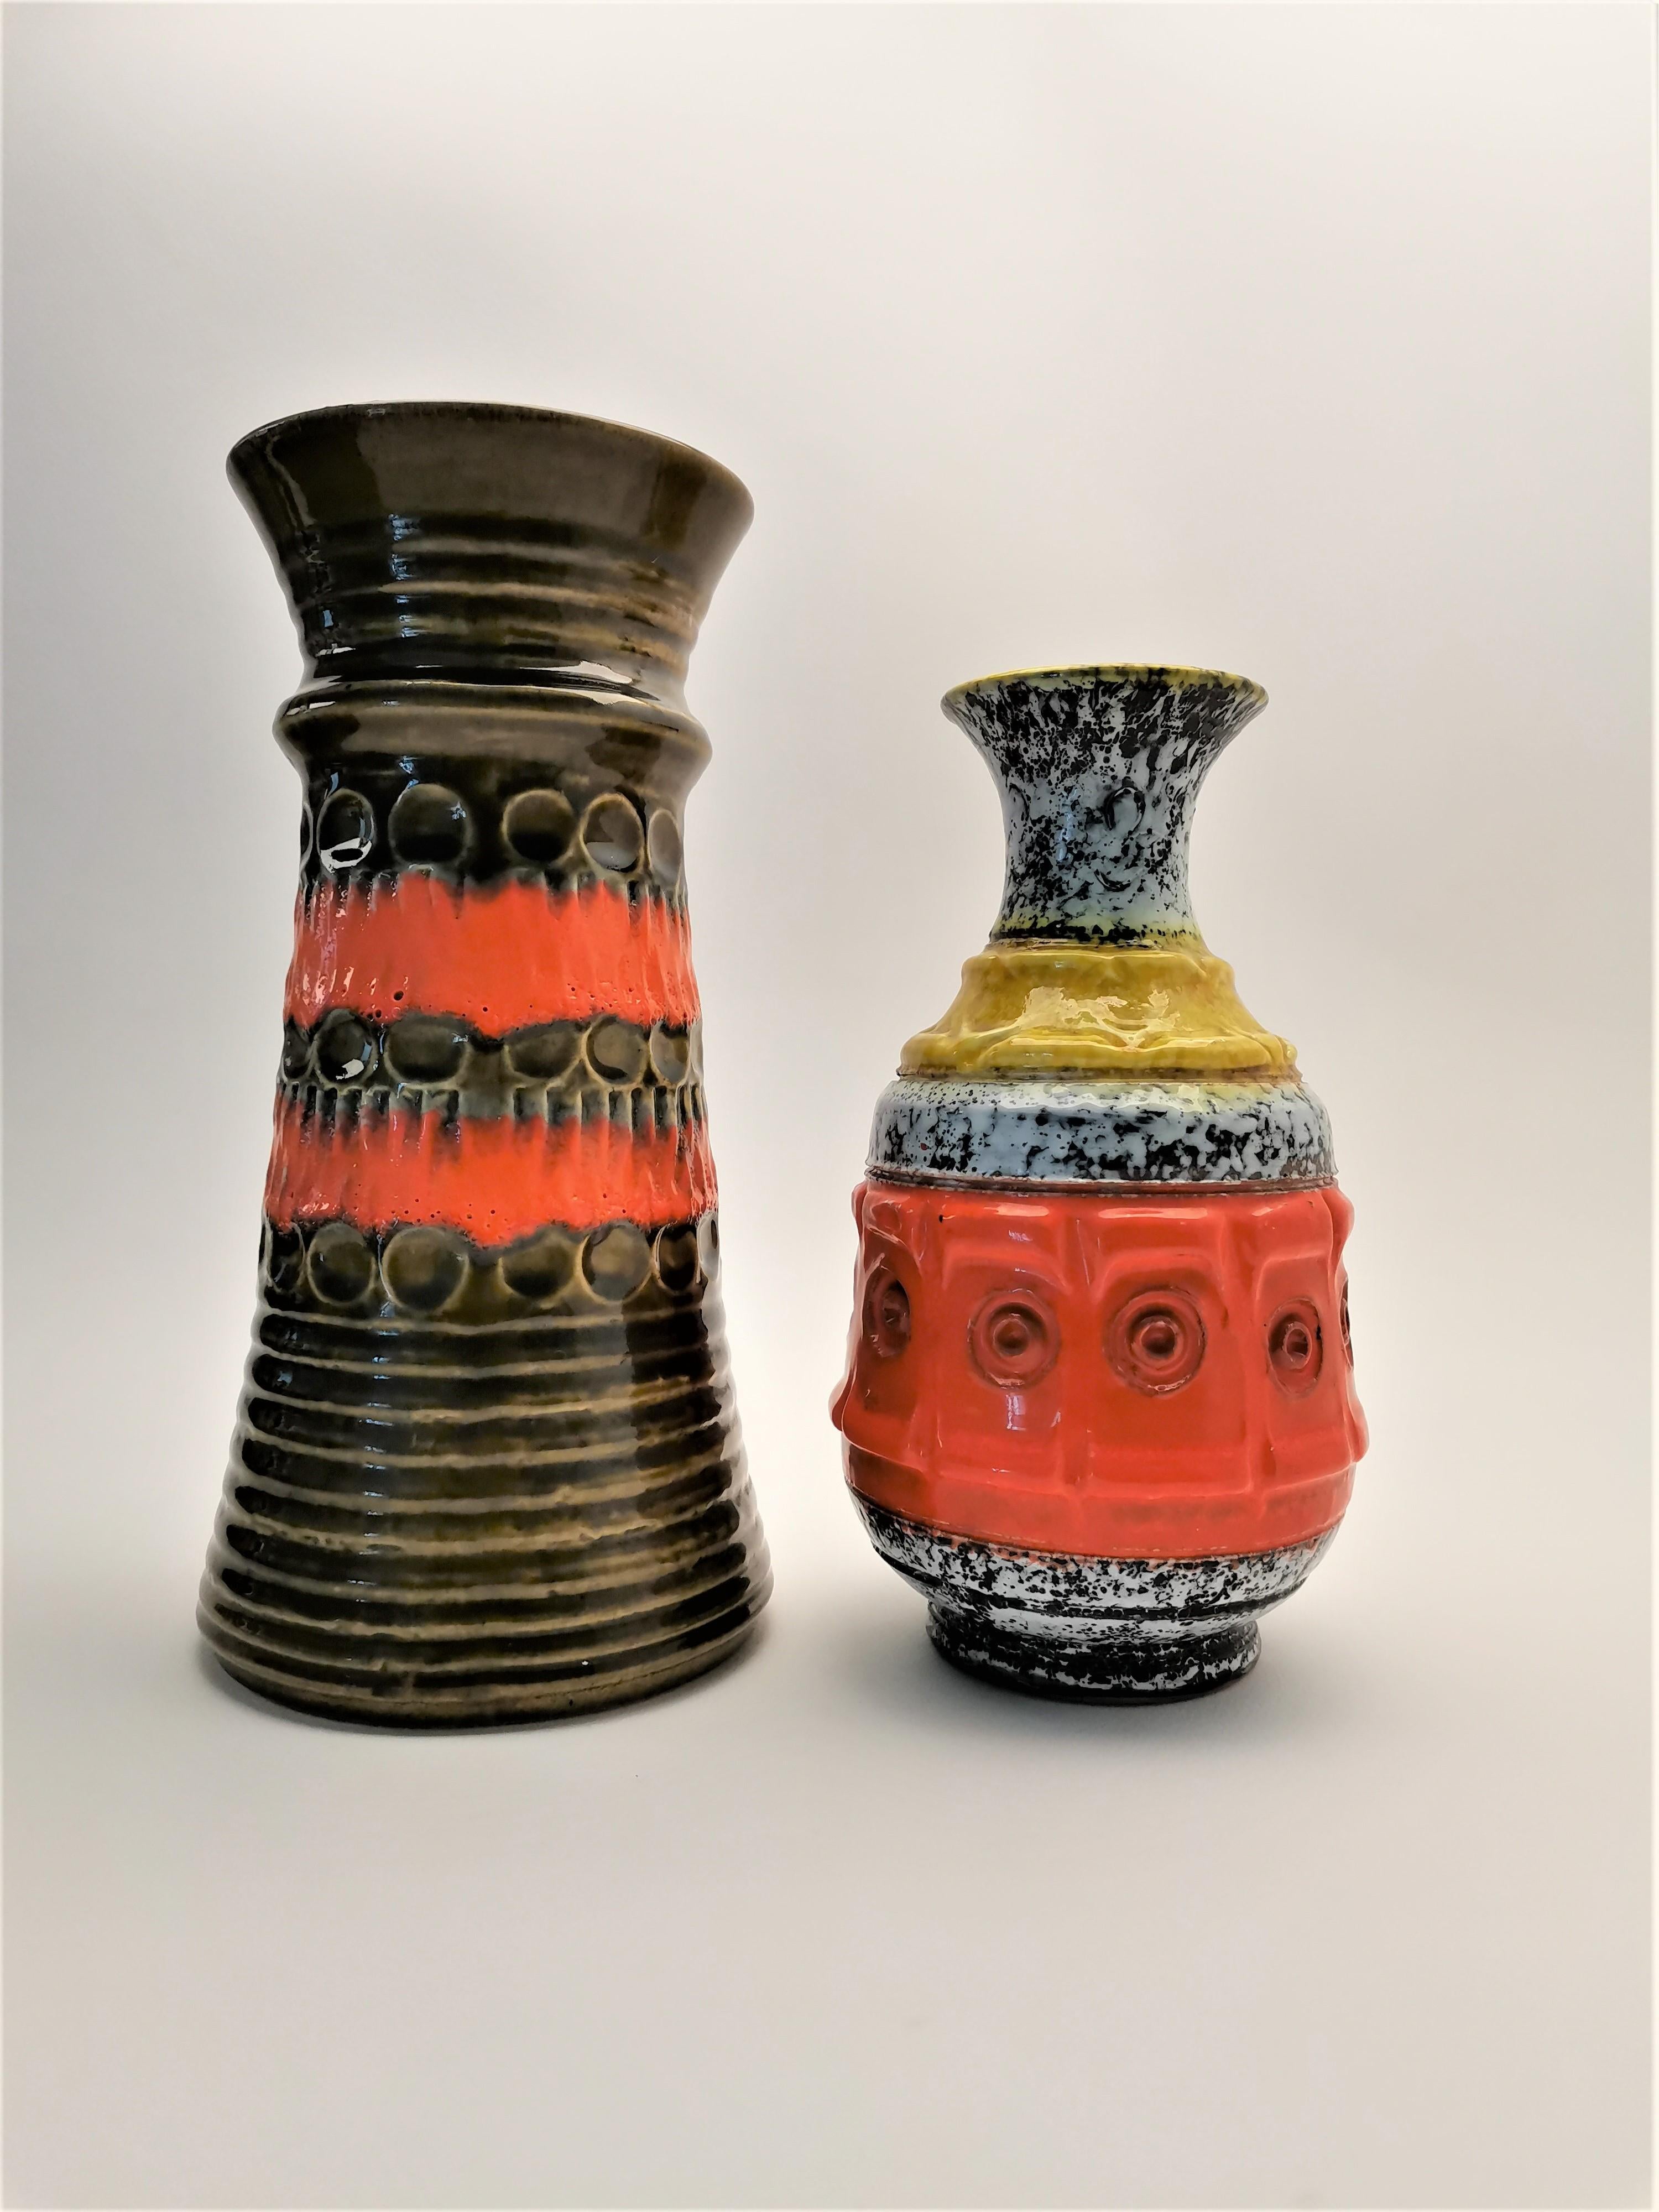 Set of 2 ceramic vases. Made in Germany in 1976. This item is in very good original vintage condition with some signs of use and age. With warm and eclectic esthetics brings to your home some nostalgic memories of the past. 
Period: 1970s
Country of